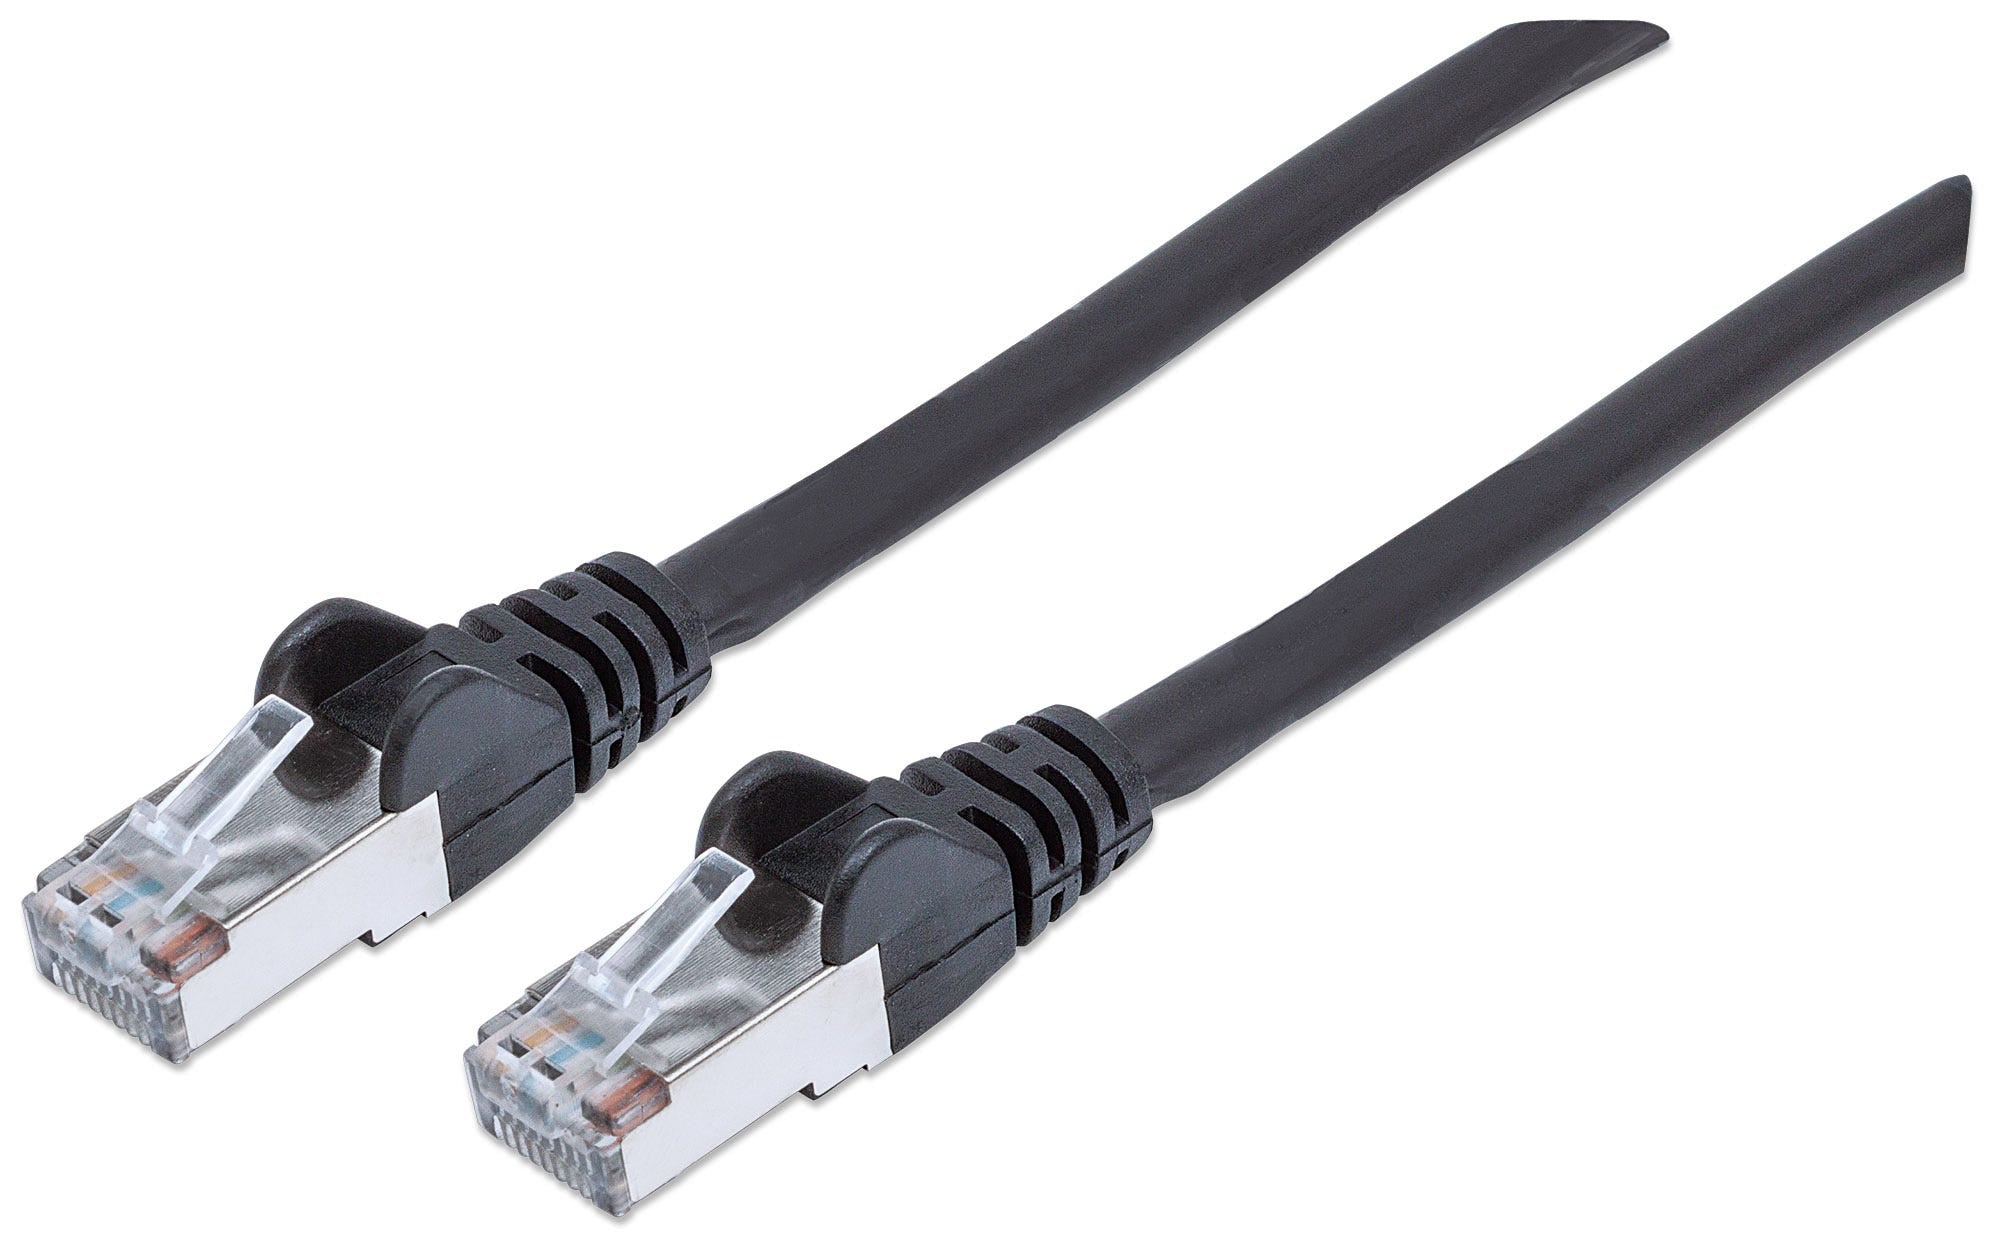 Intellinet Network Patch Cable, Cat6A, 5m, Black, Copper, S/FTP, LSOH / LSZH, PVC, RJ45, Gold Plated Contacts, Snagless, Booted, Lifetime Warranty, Polybag